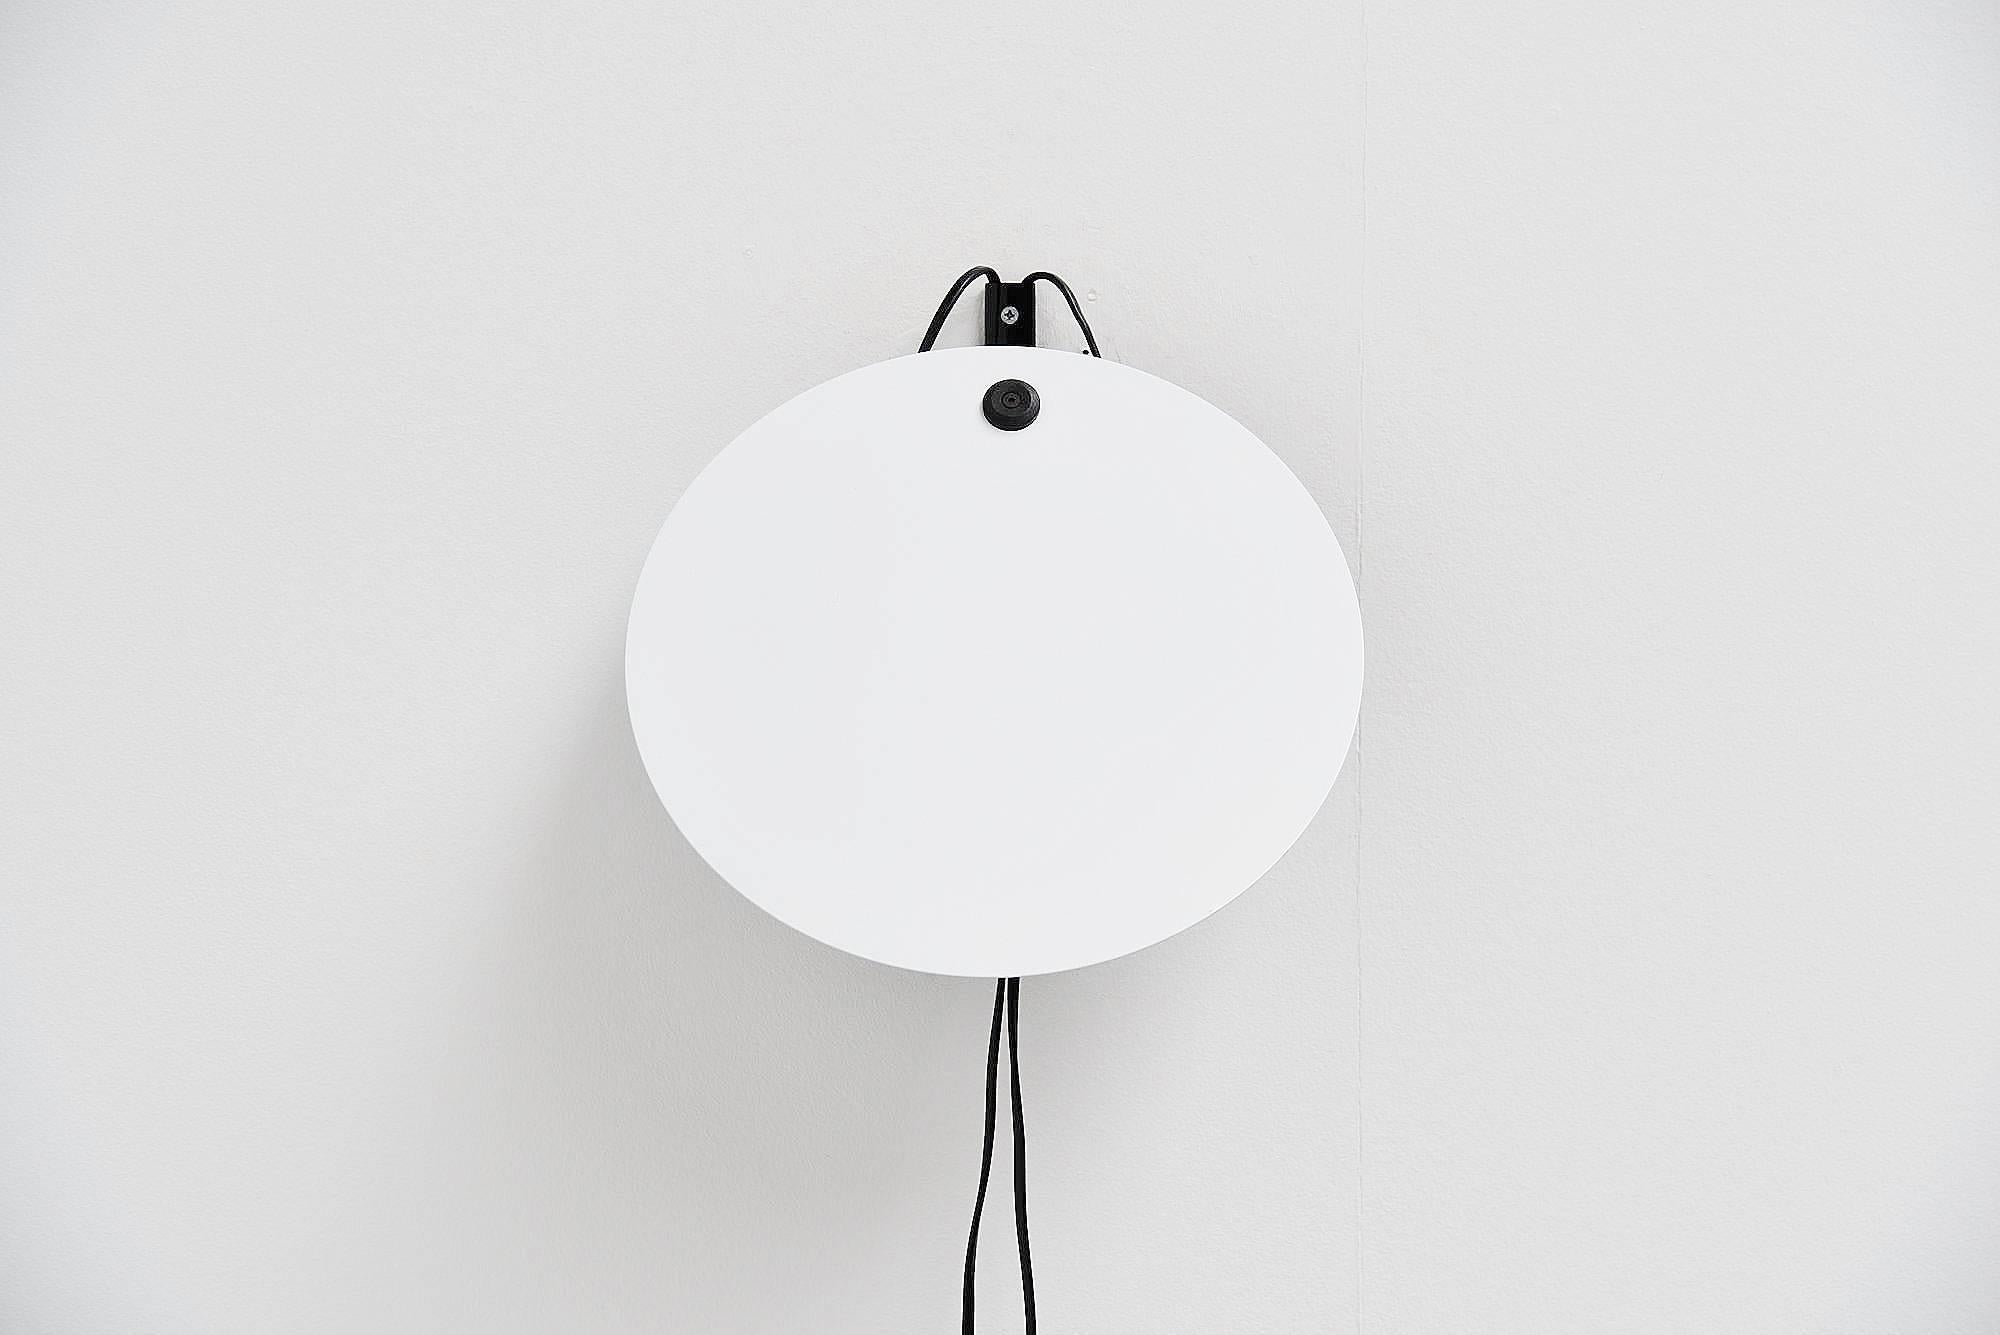 Rare Idomeneo 120 bed reading light designed by Vico Magistretti, manufactured by Oluce Italy 1985. This is a fantastic wall lamp great as a bed reading light because of the two fully adjustable spots. The spots and body are made of black plastic,